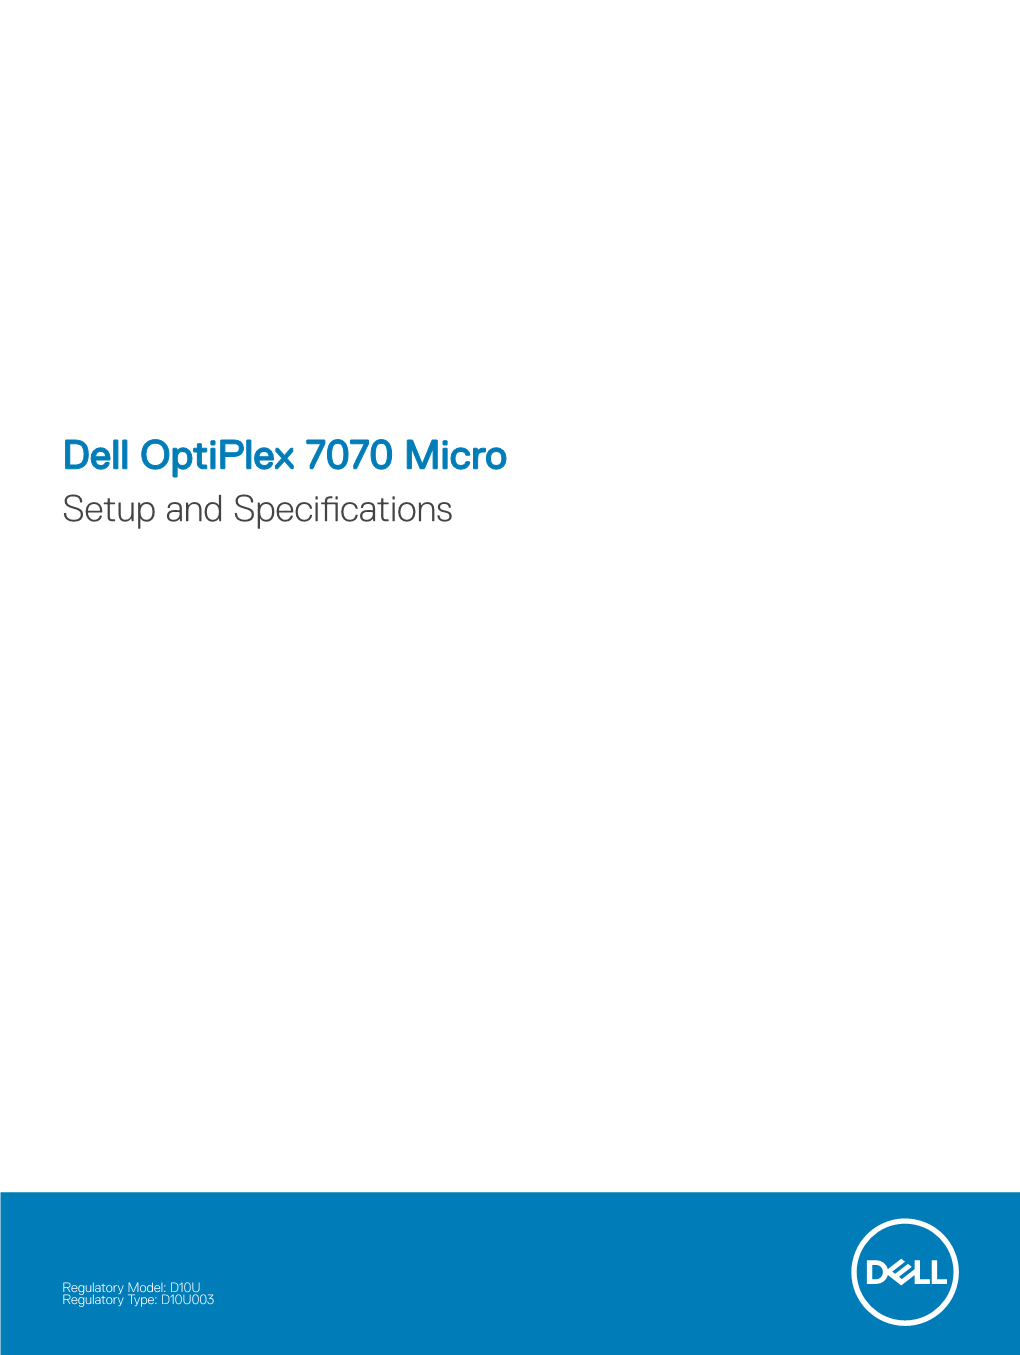 Dell Optiplex 7070 Micro Setup and Specifications